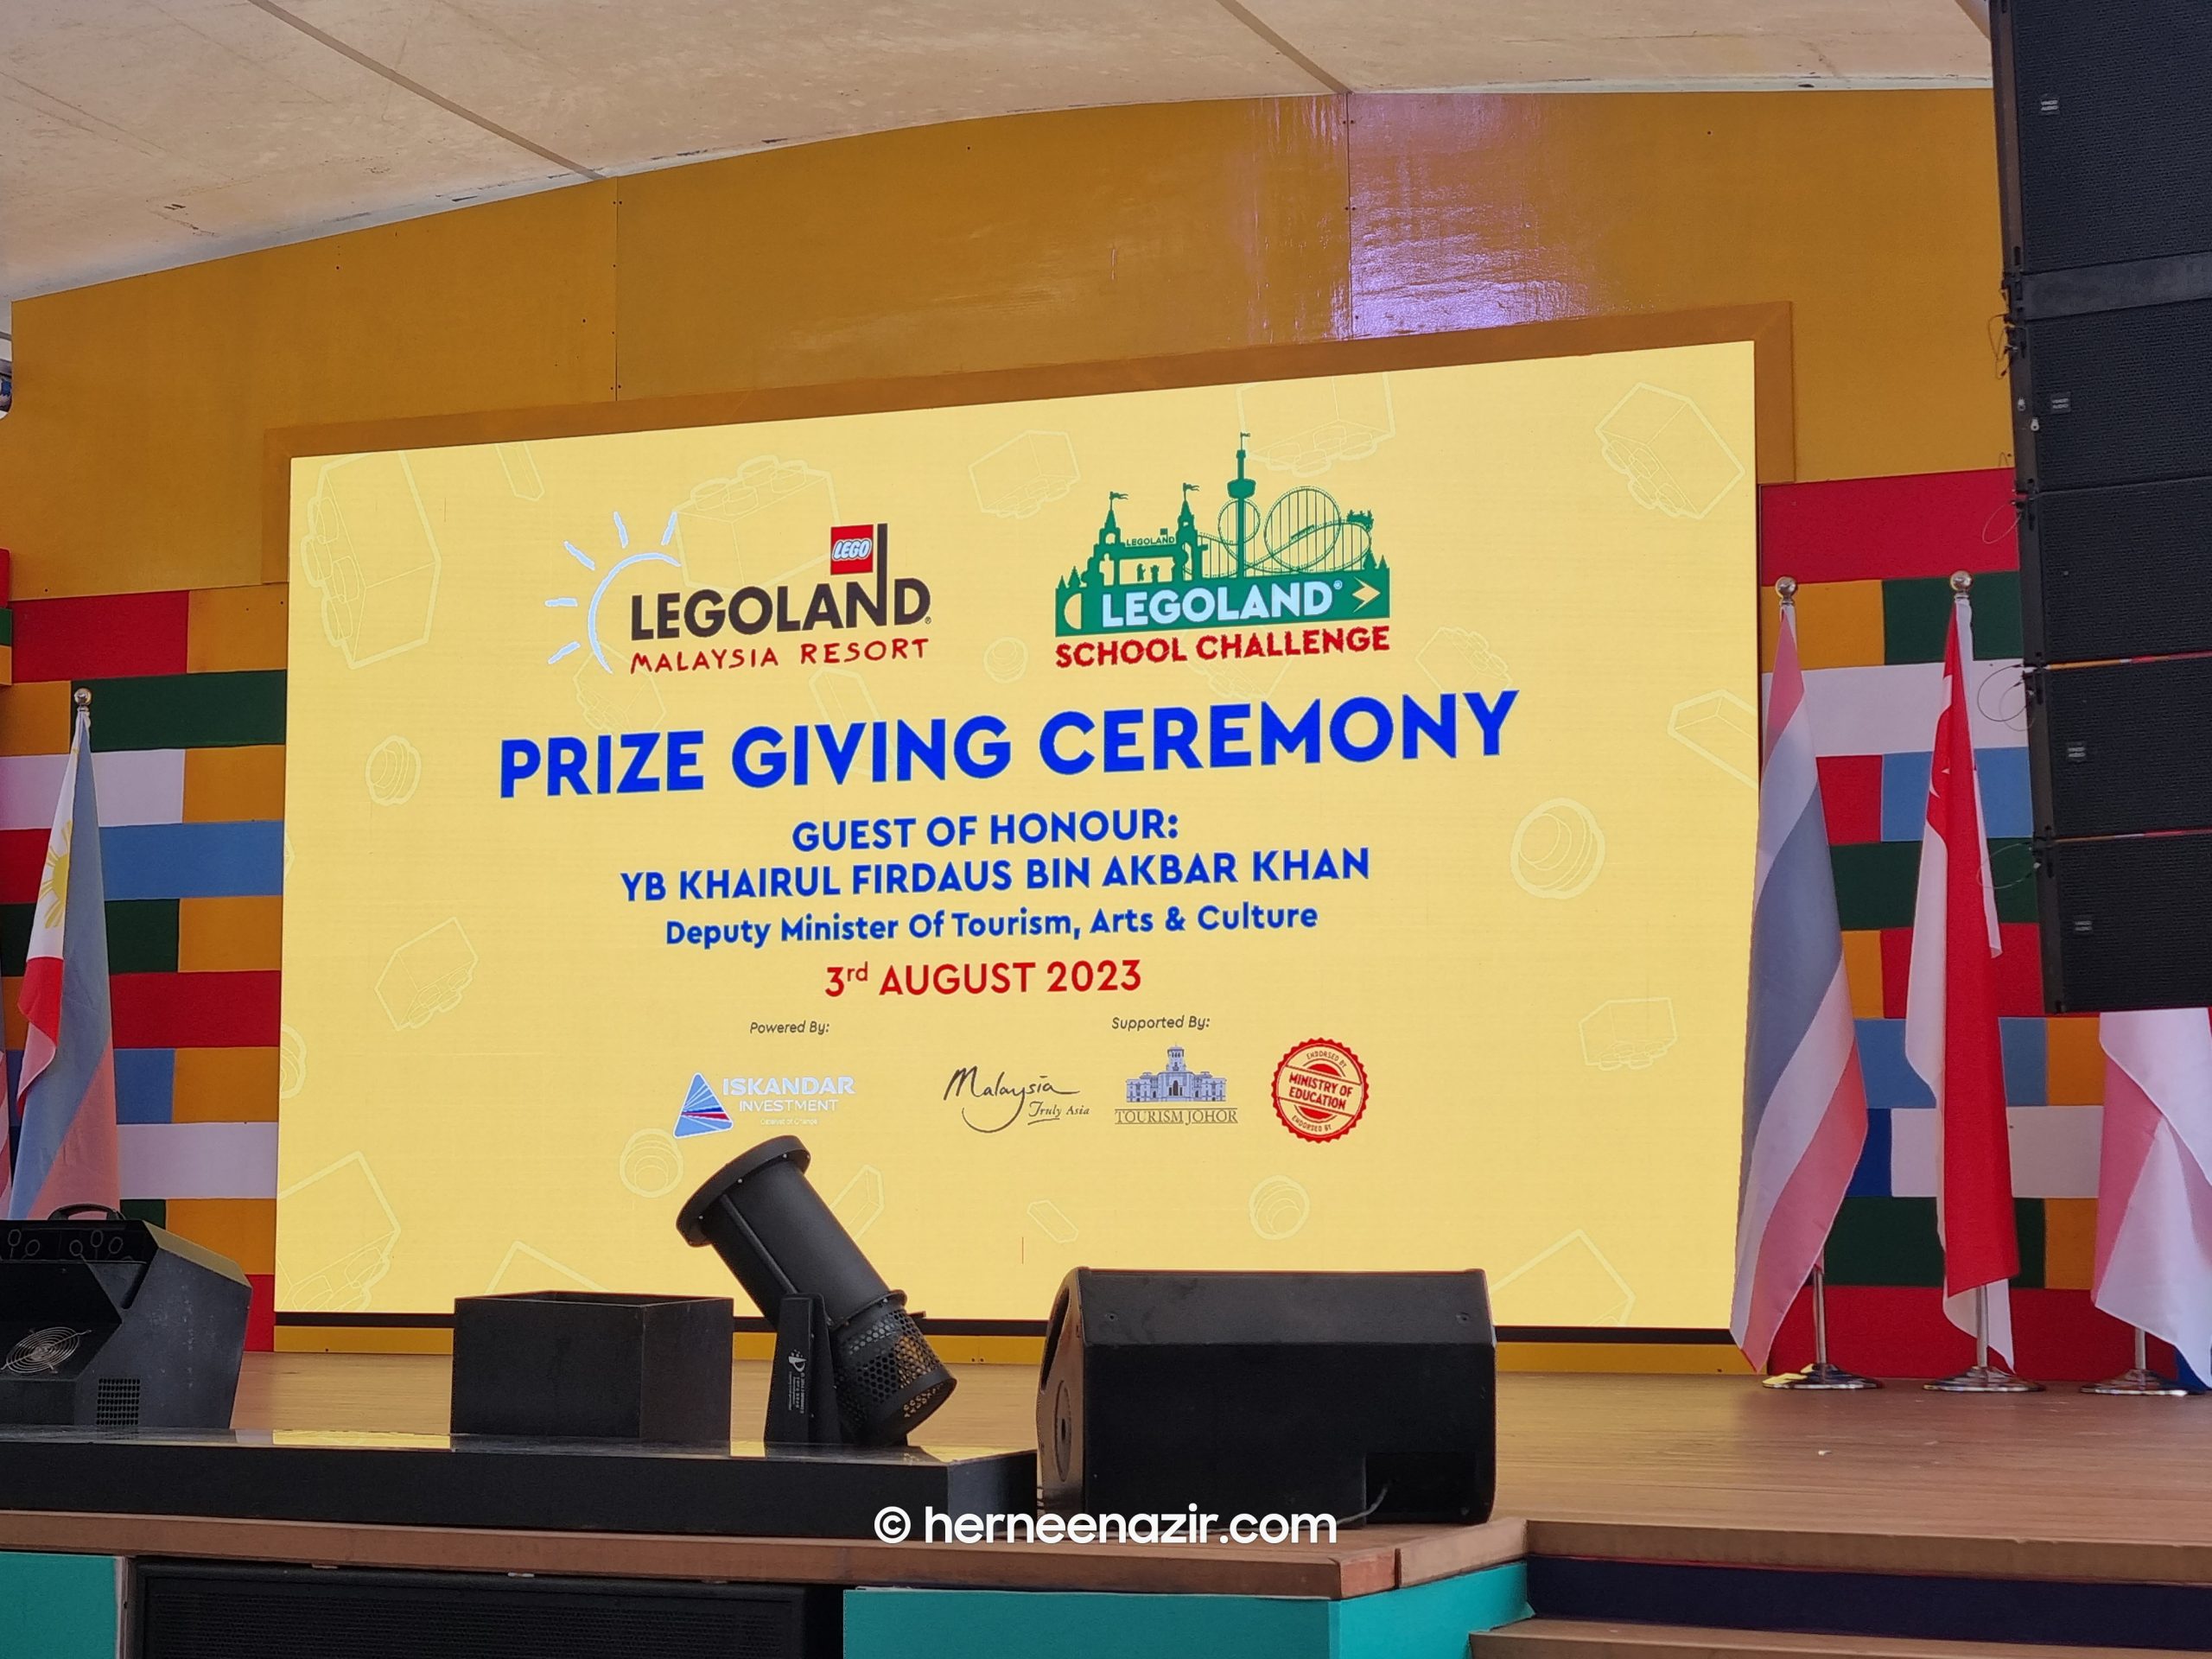 LEGOLAND® School Challenge 2023: ASEAN’s Best Young LEGO Builders Compete to Shape the Cities of the Future